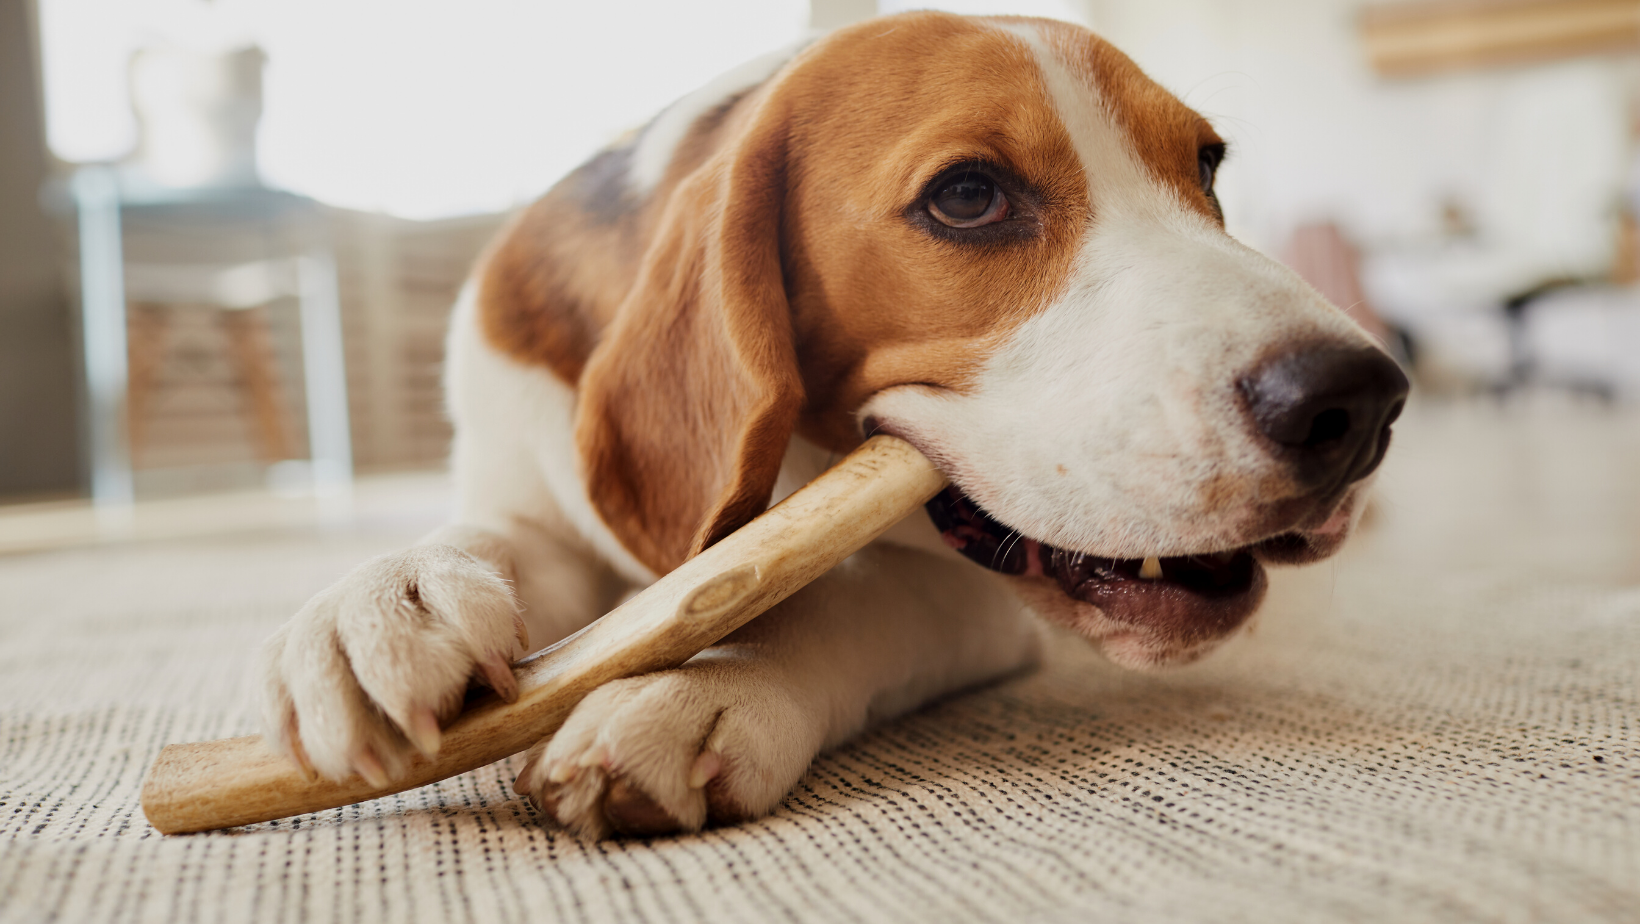 Give your dog an alternative to chew